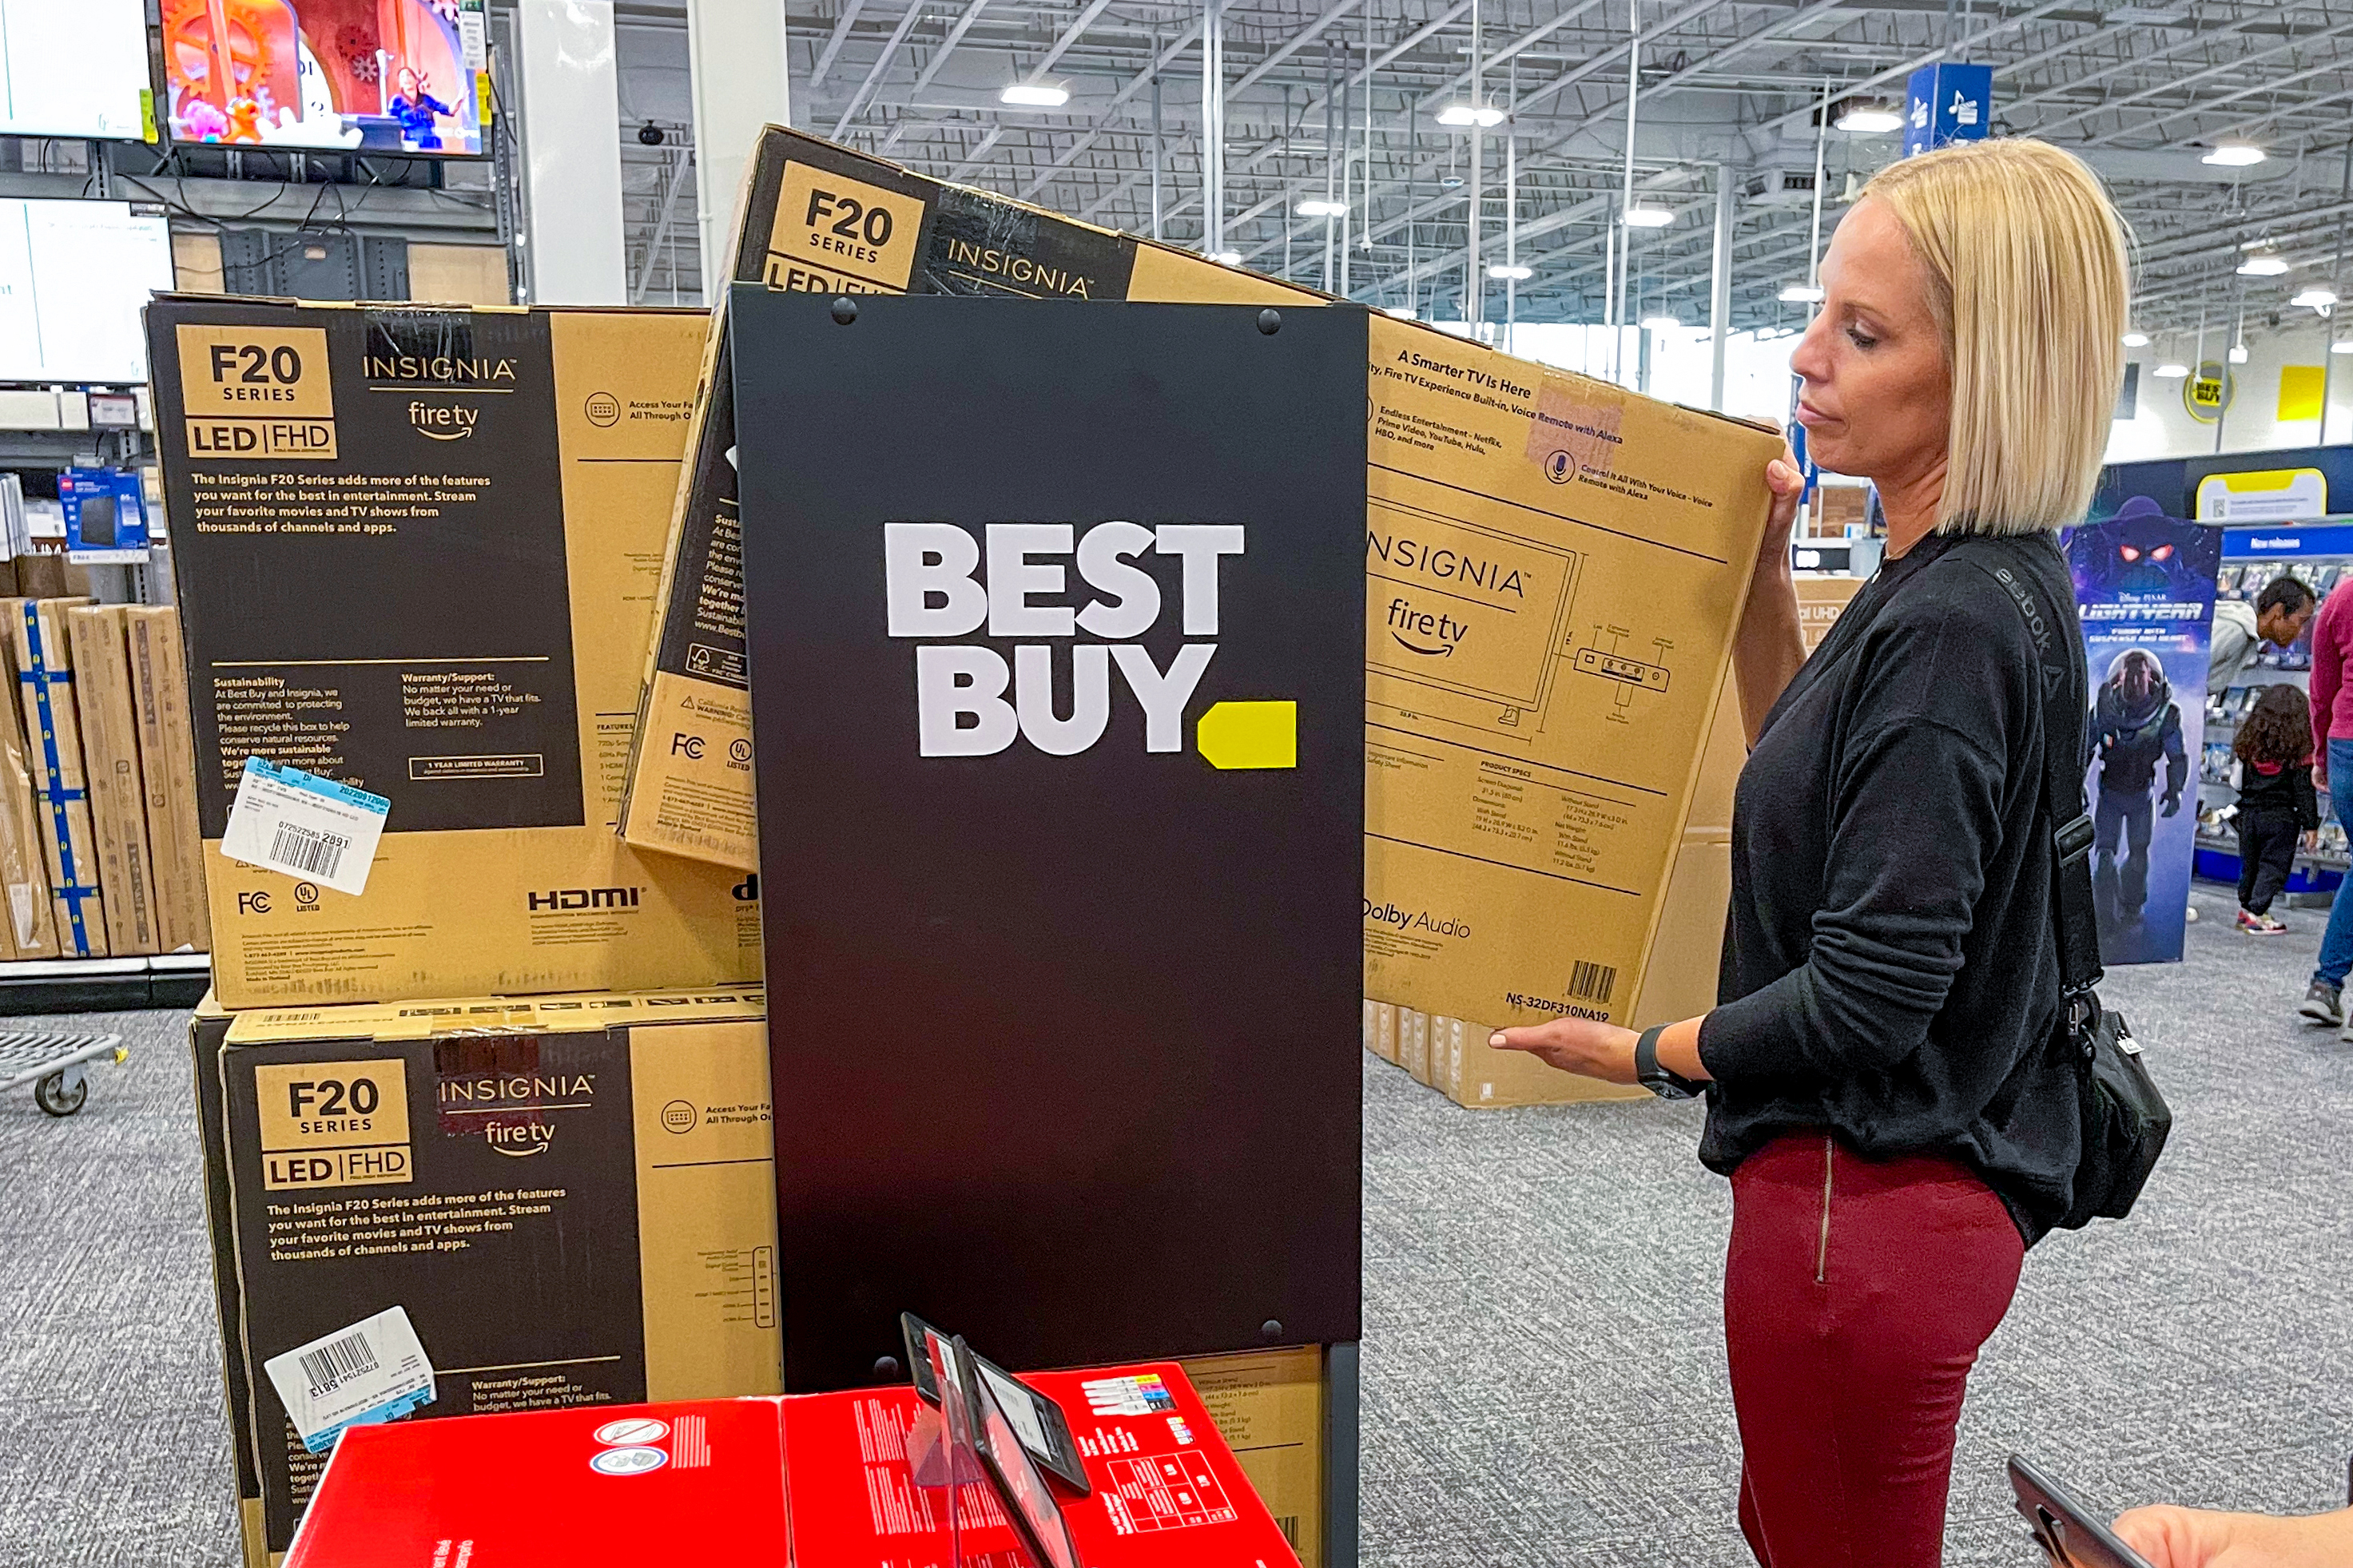 What is Best Buy's return policy? Everything you need to know